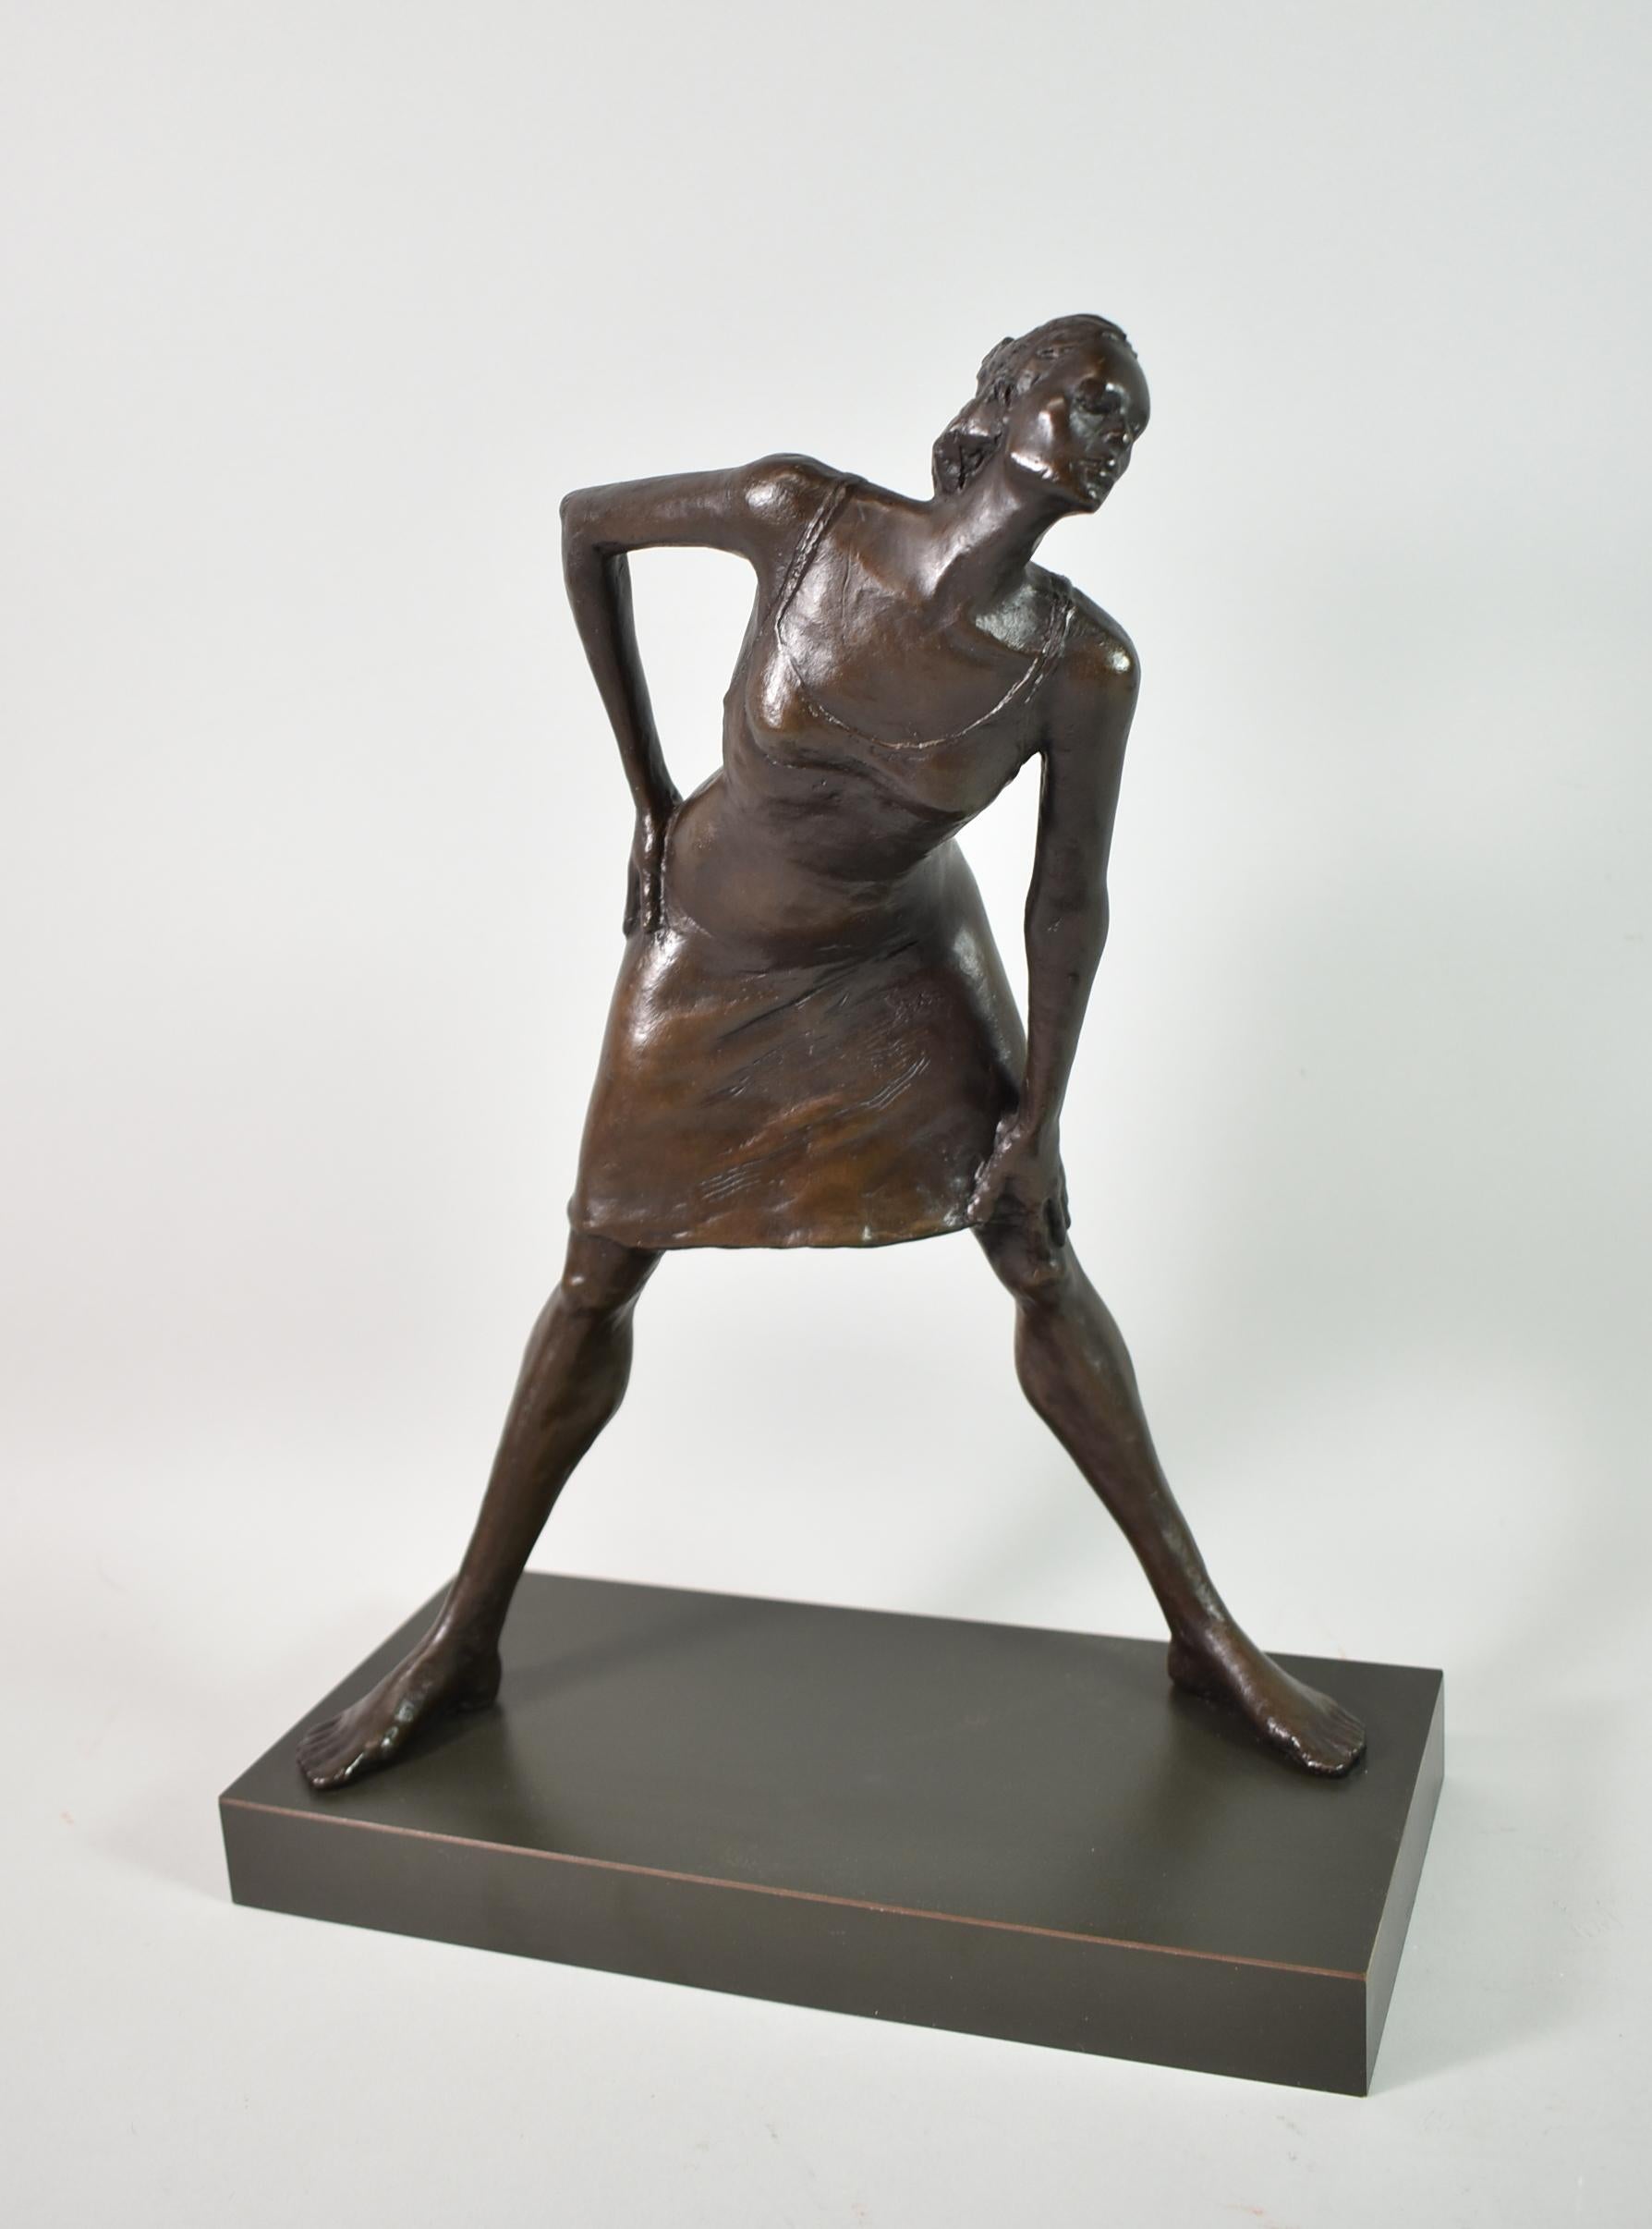 Bronze signed and dated limited edition female figure by Norma Penchansky Glasser circa 1987. 1/7 on a wood base. Lost wax process. Very nice condition. Dimensions: 5.5